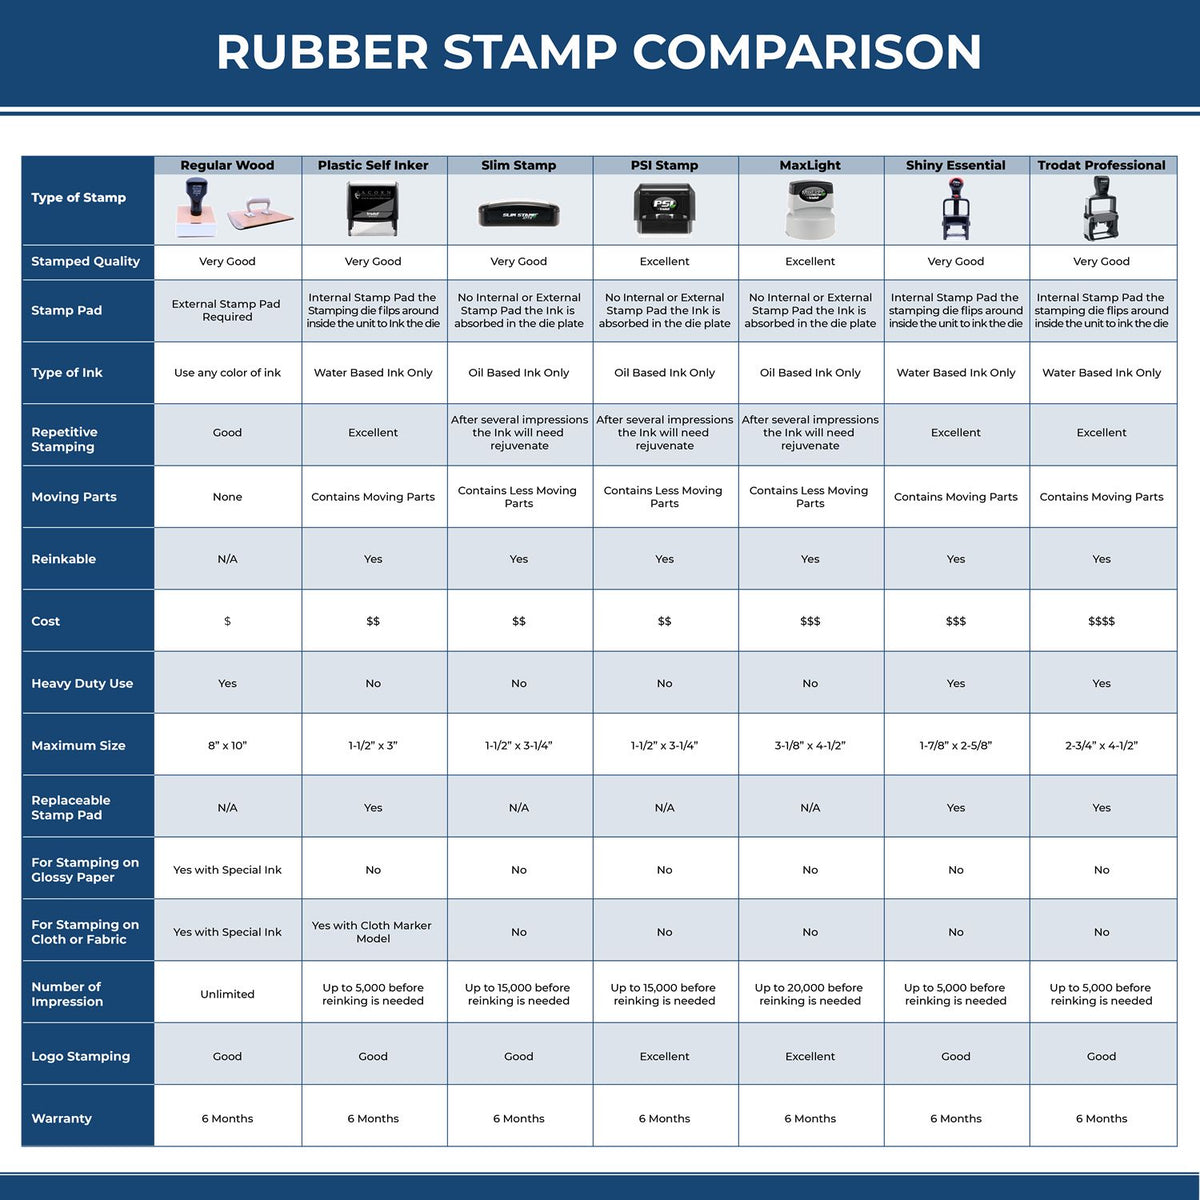 Large Self-Inking Do Not Bend Stamp 4895S Rubber Stamp Comparison